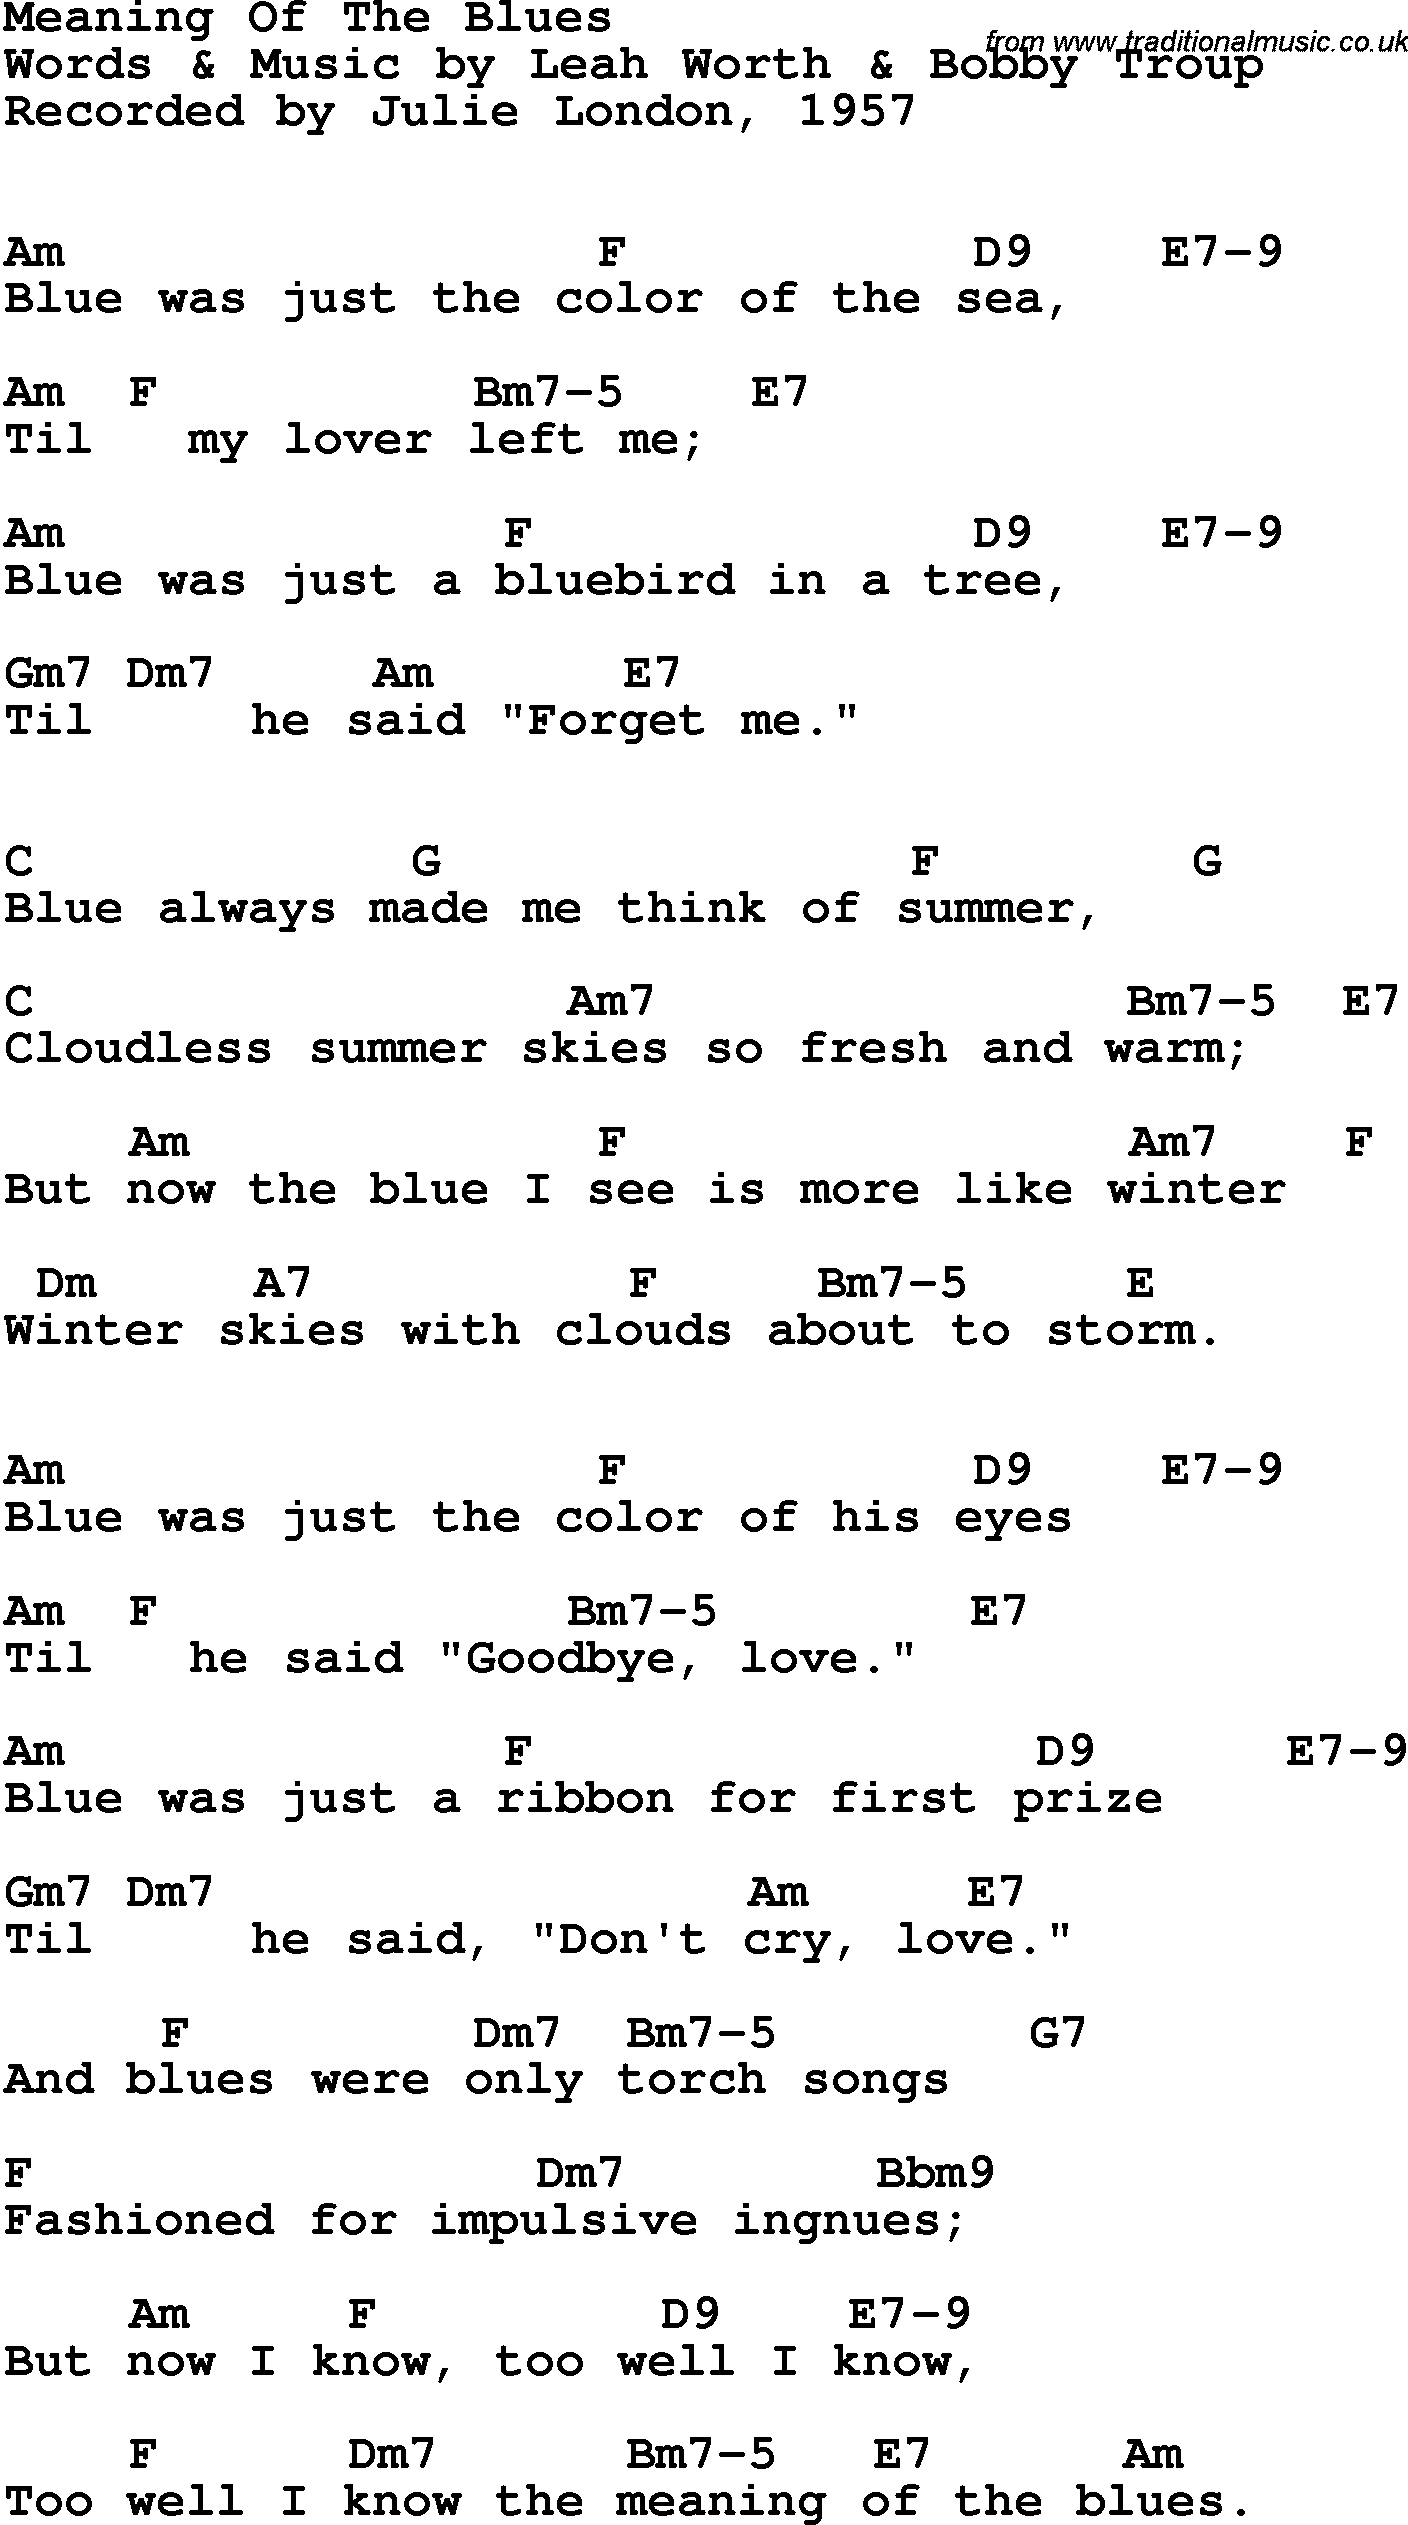 Song Lyrics with guitar chords for Meaning Of The Blues, The - Julie London, 1957